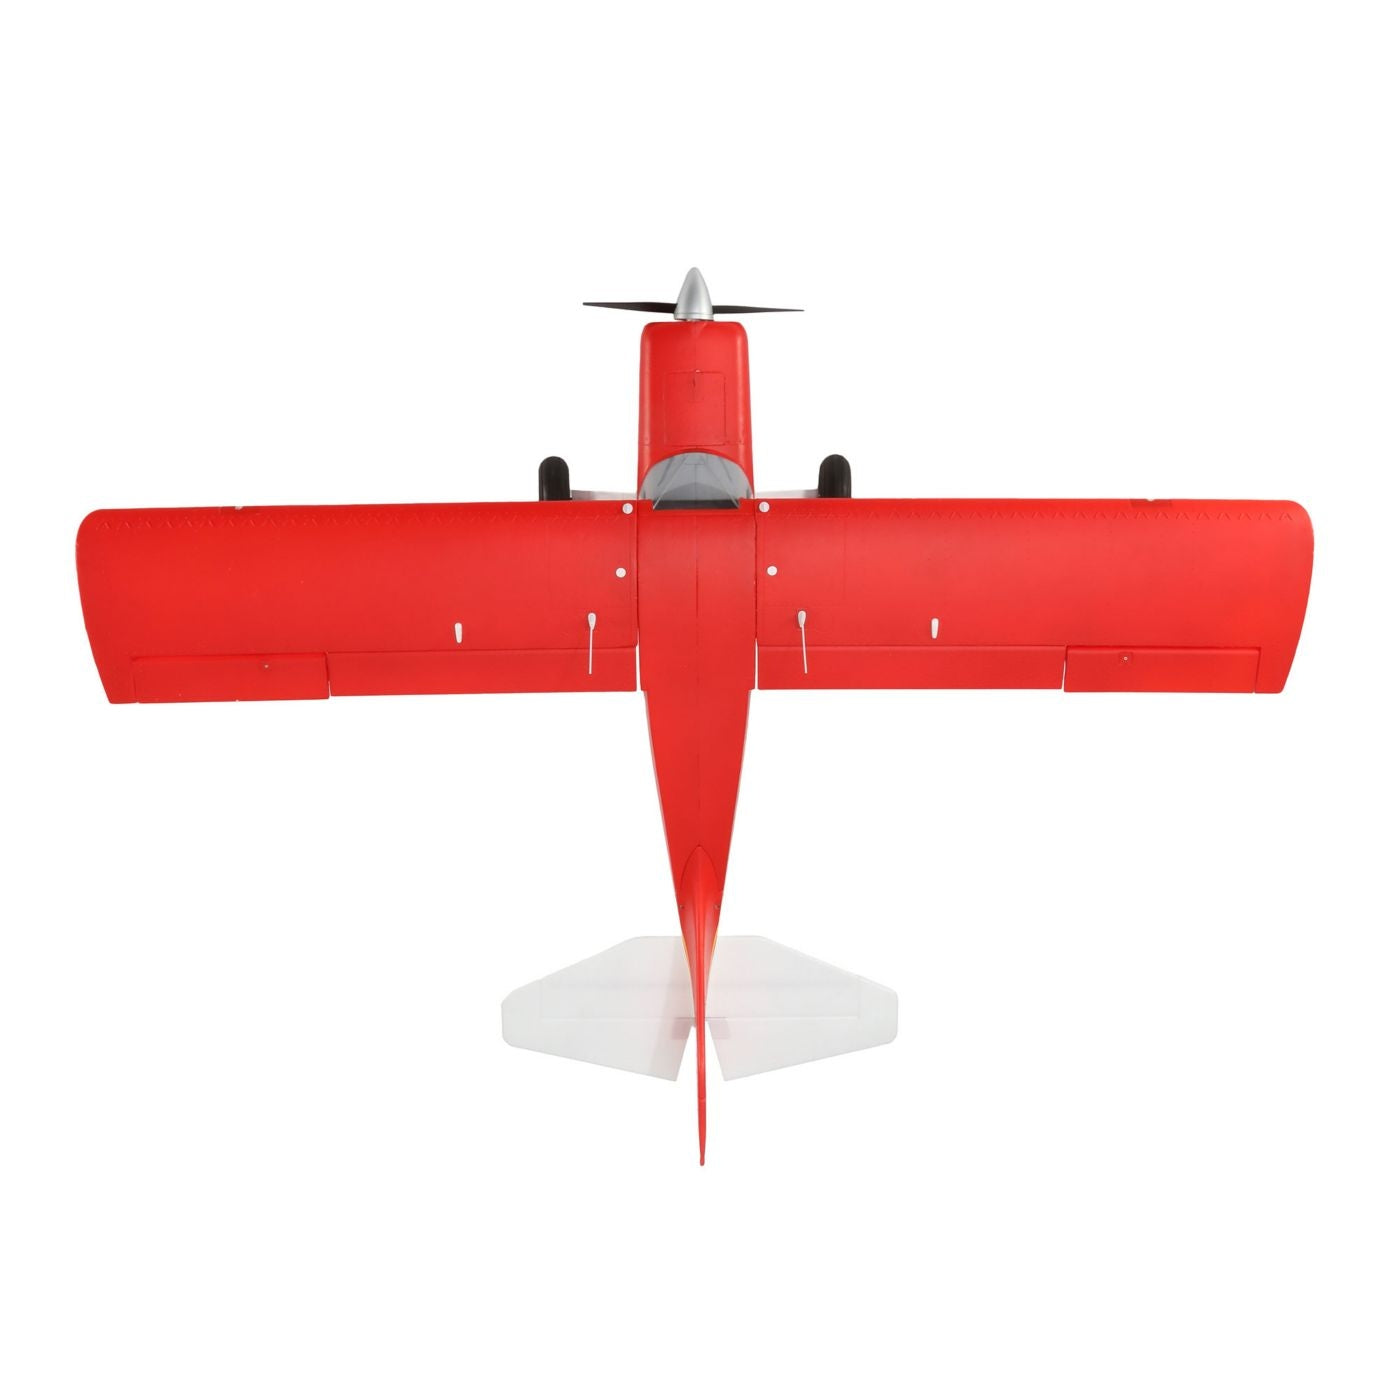 E-Flite Maule M-7 1.5m BNF Basic with AS3X and SAFE Select (includes Floats) EFL53500